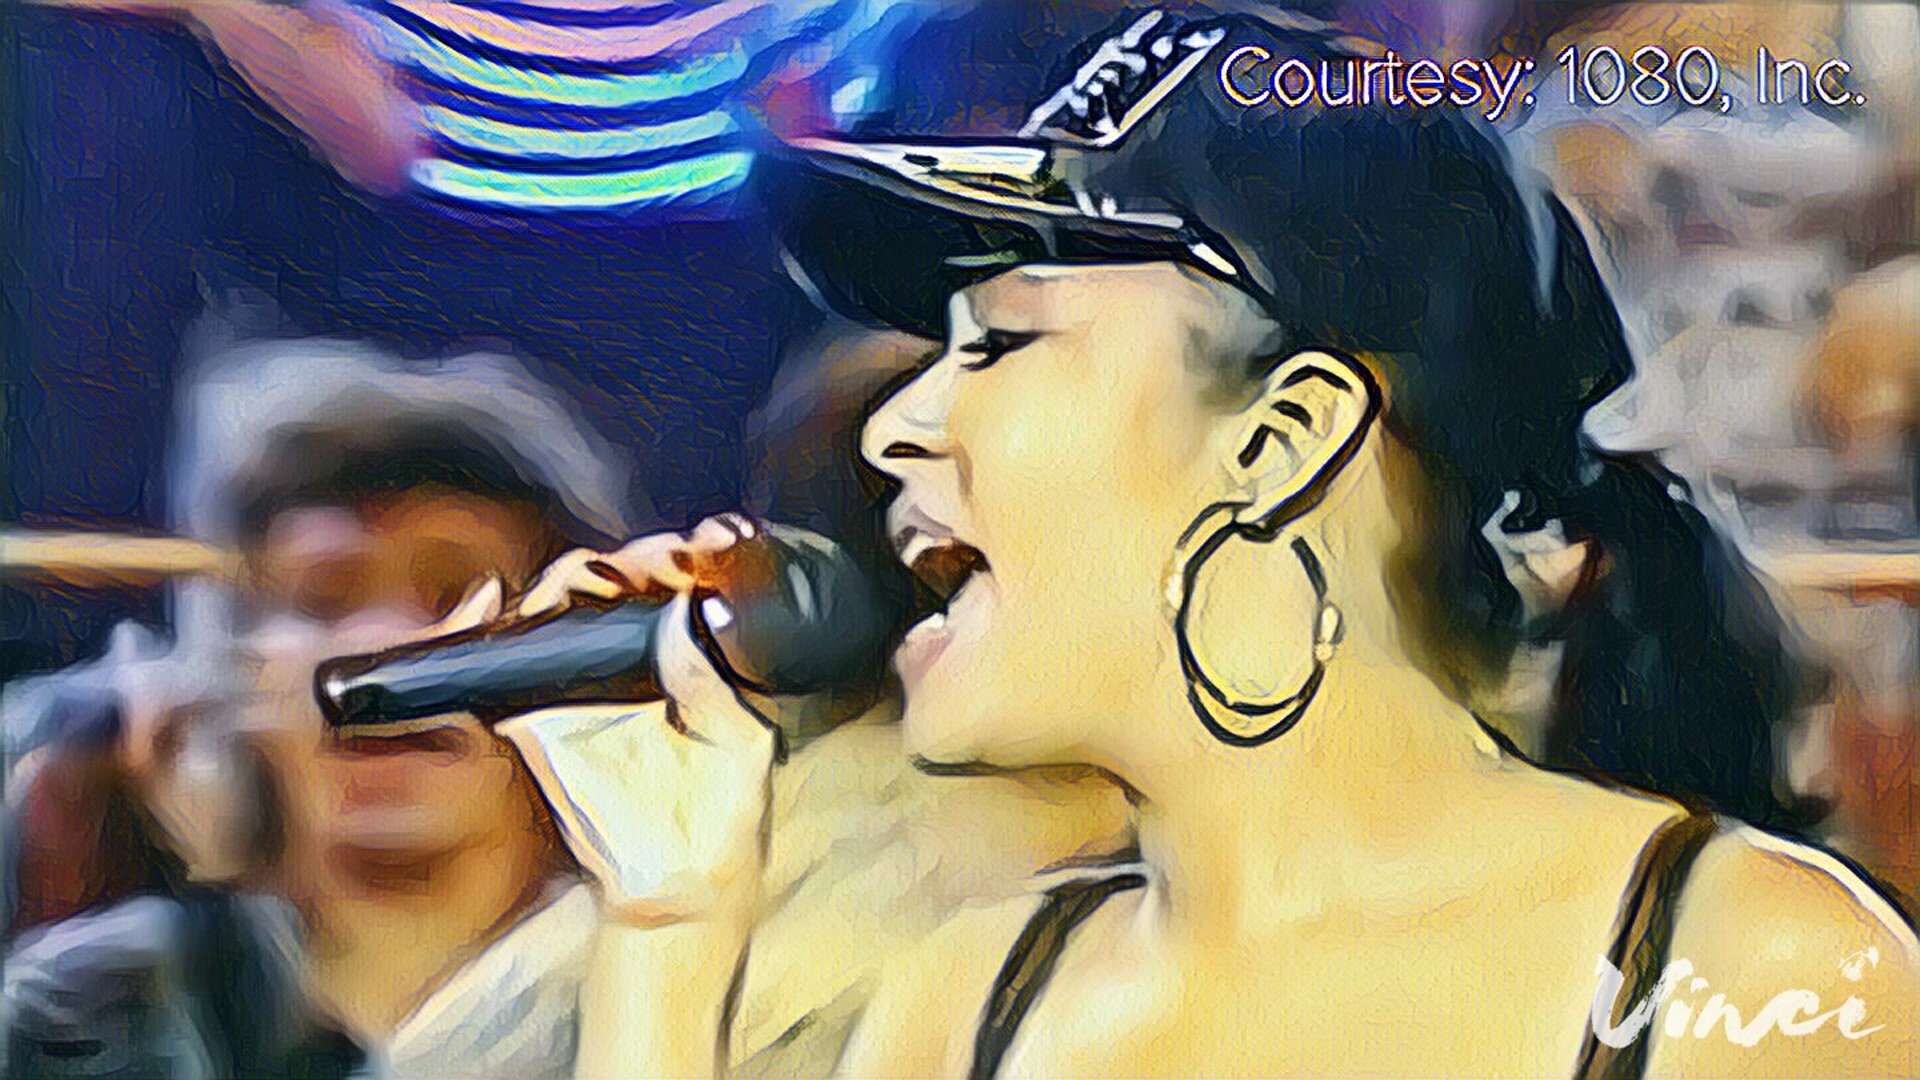 Tuesday marks 25 years since the murder of Tejano star Selena Quintanilla-Perez.